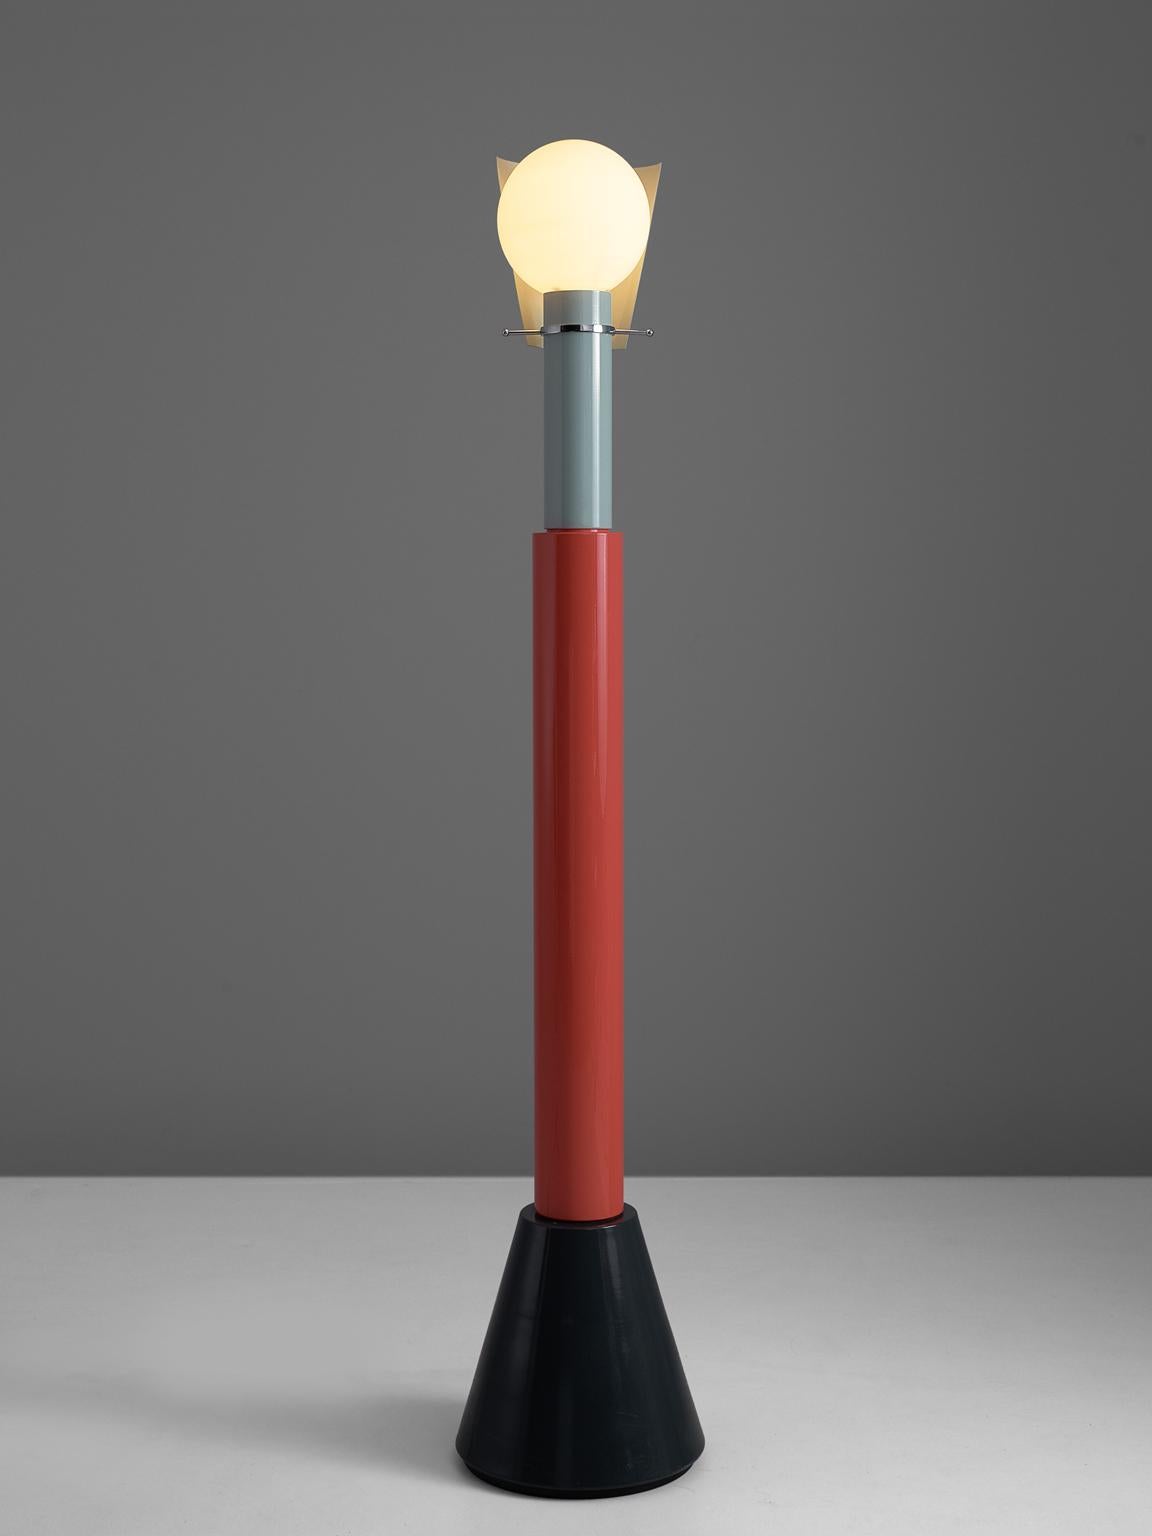 Alessandro Mendini for Segno, floor lamp 'Milo', enameled metal and glass, by Italy 1982. 

Flighty floor lamp designed by Alessandro Mendini in 1982, in the style of Memphis. This lamp is a simplified representation of a male figure. Black base